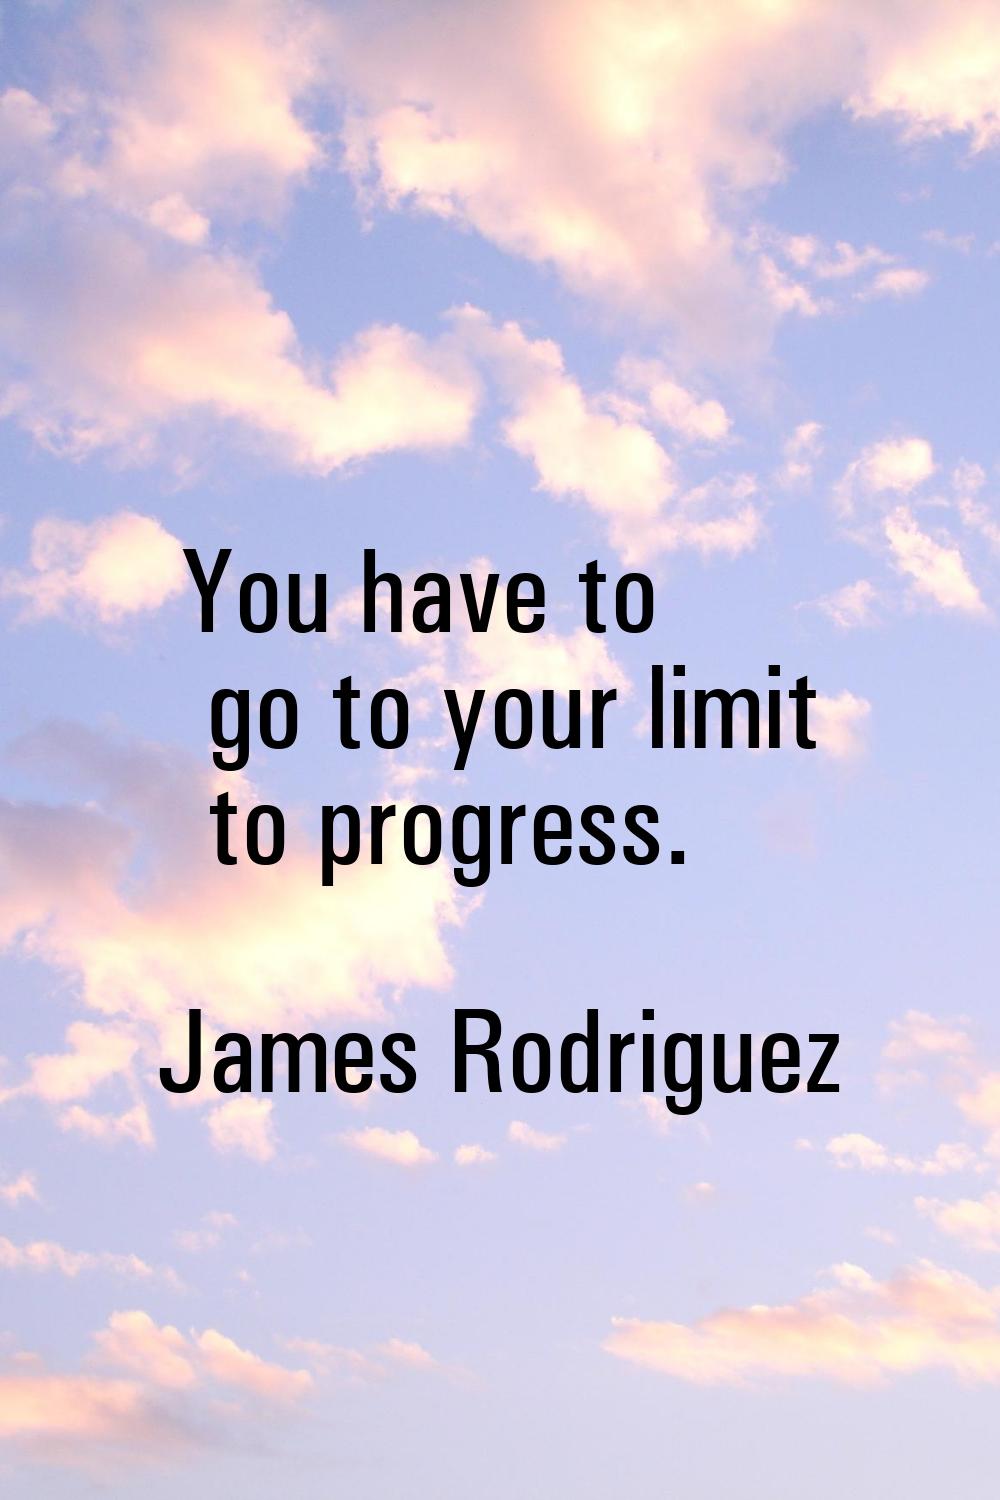 You have to go to your limit to progress.